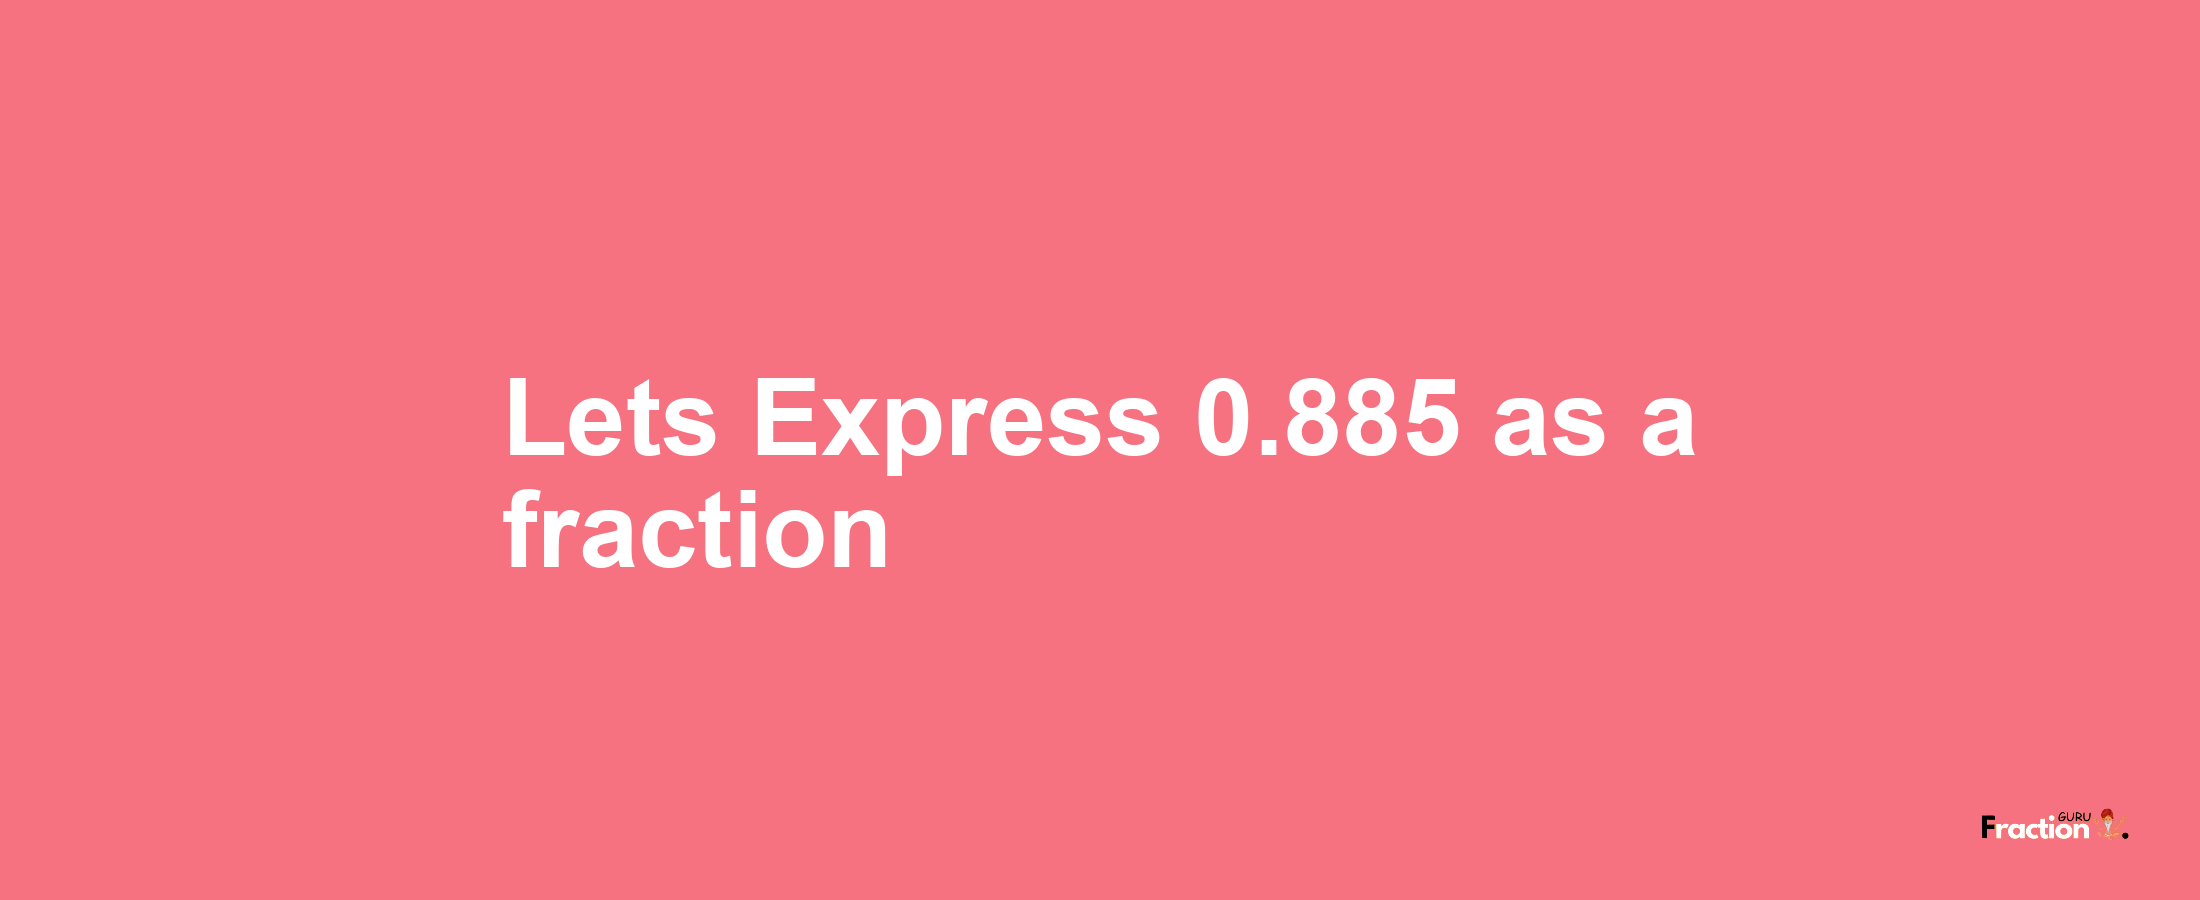 Lets Express 0.885 as afraction